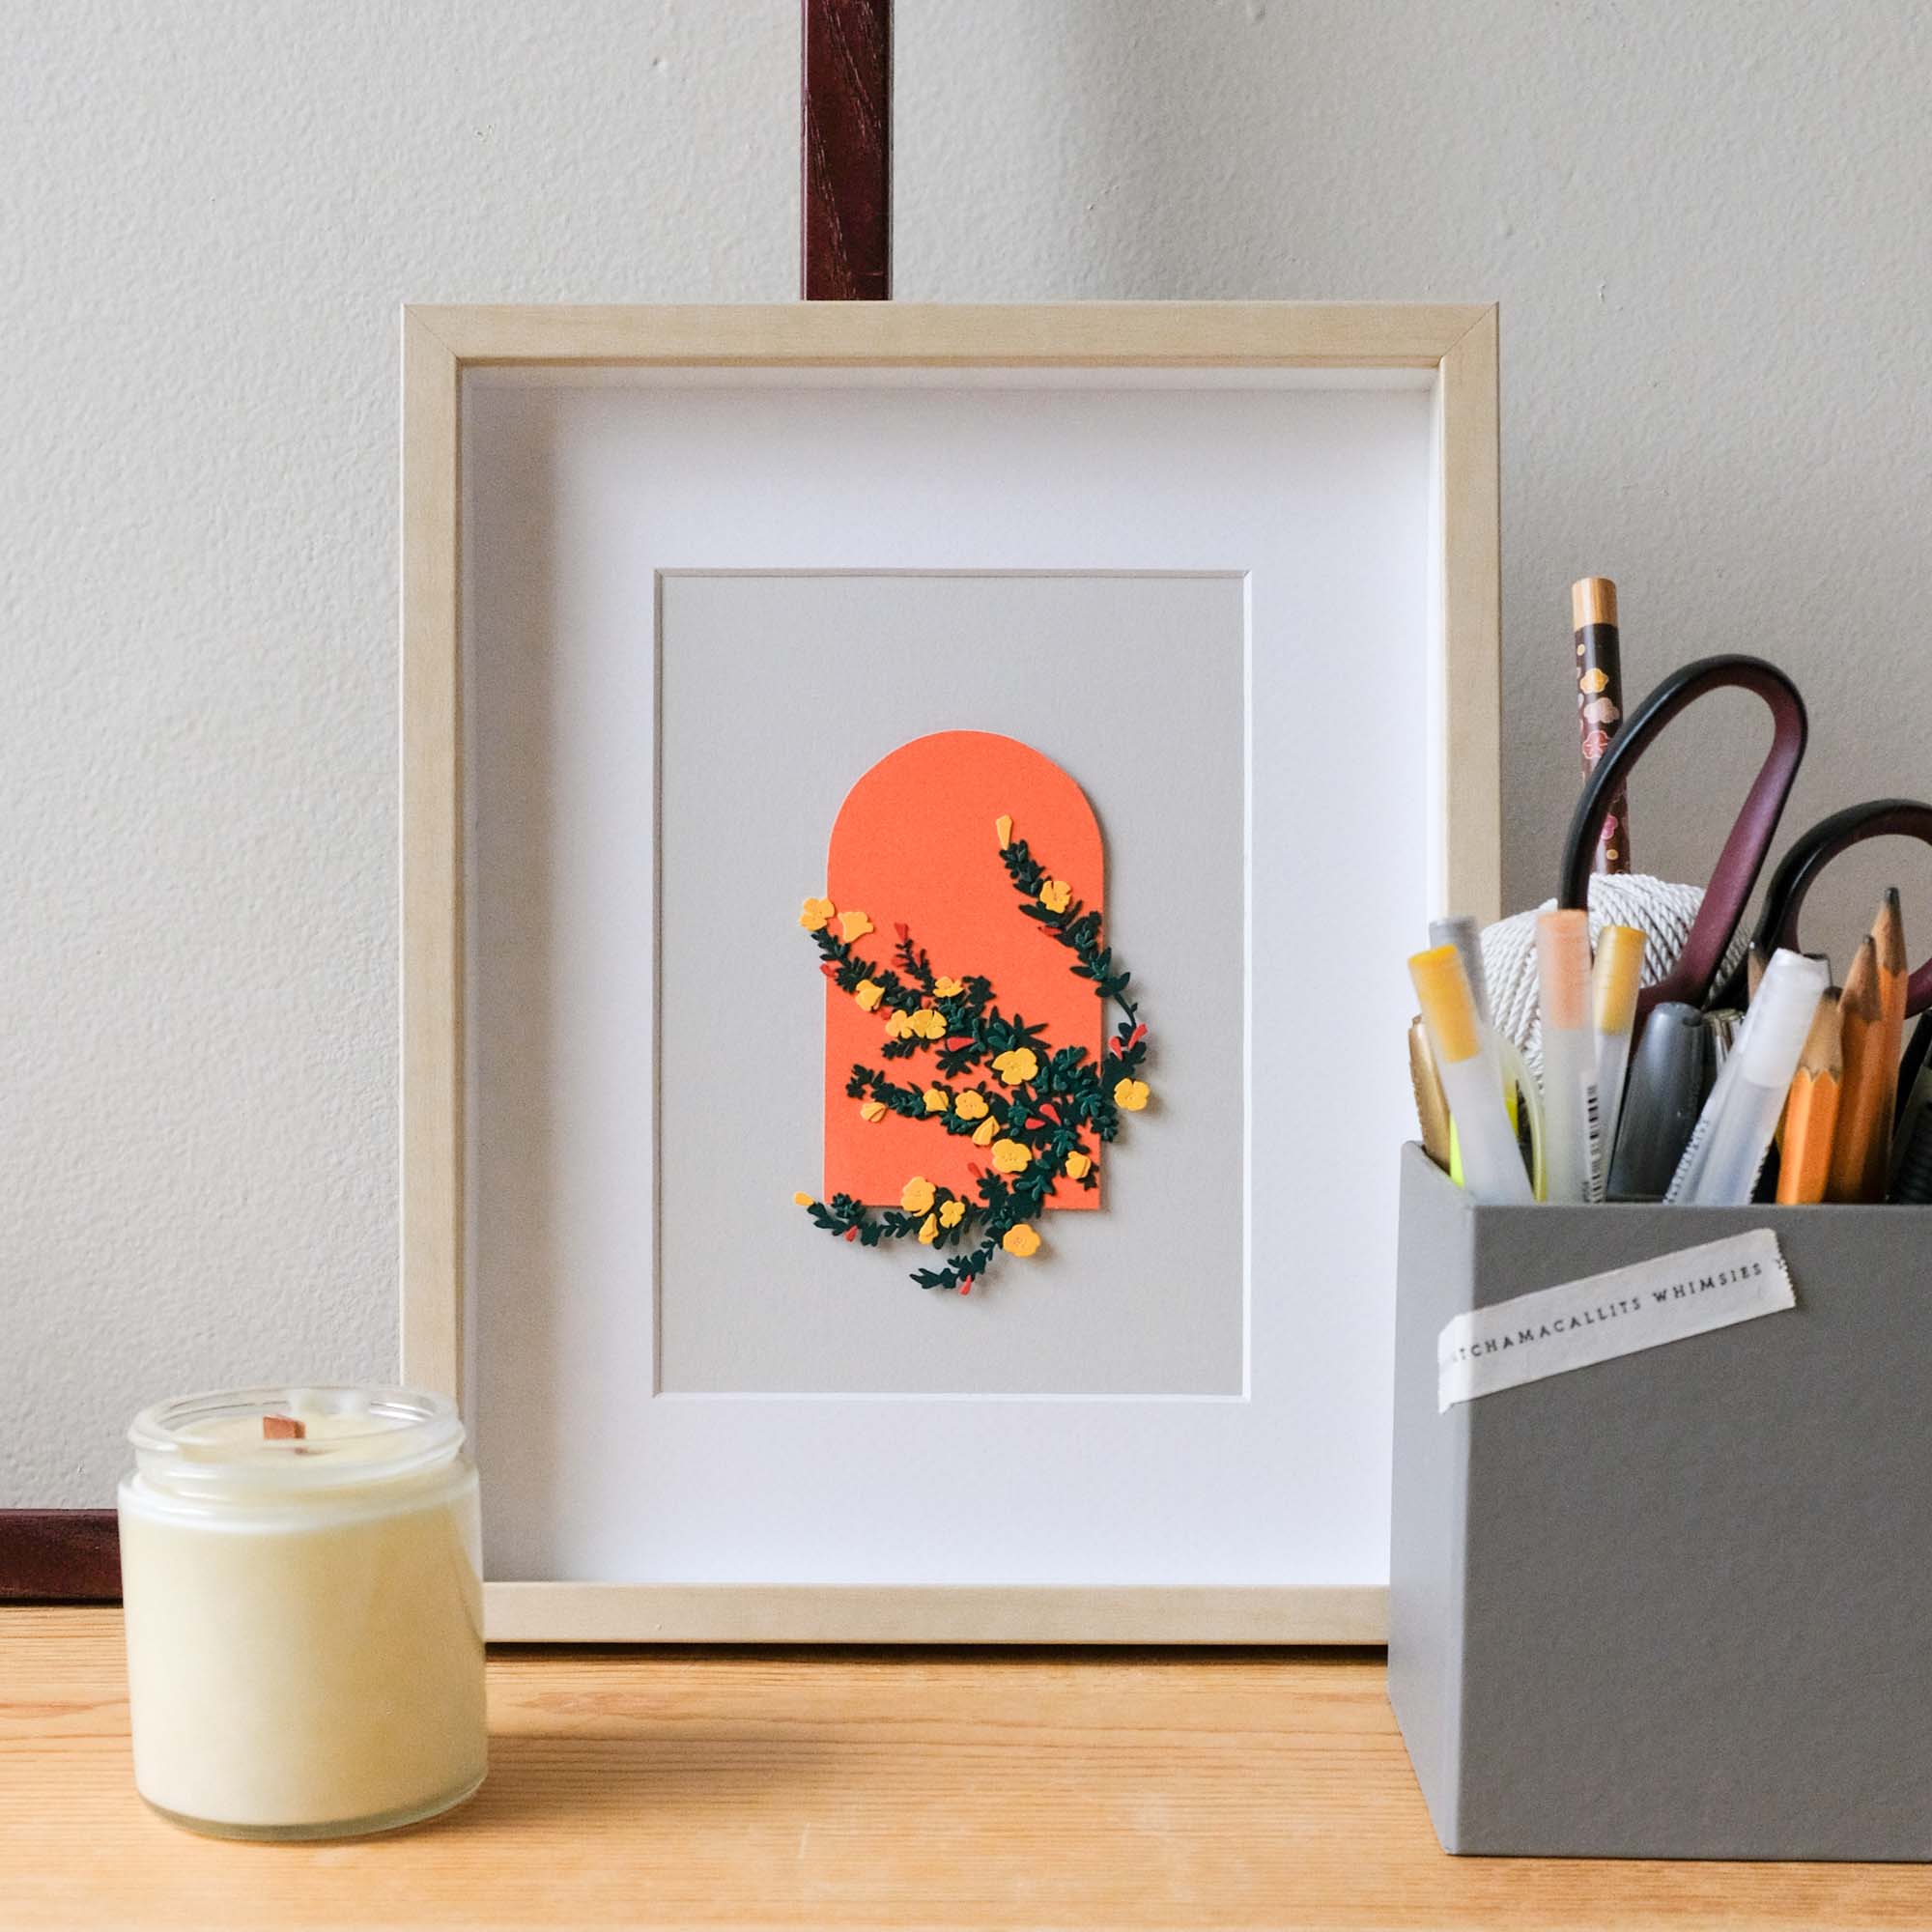 A framed copy of the paper beach primrose sits on a desk with a candle.